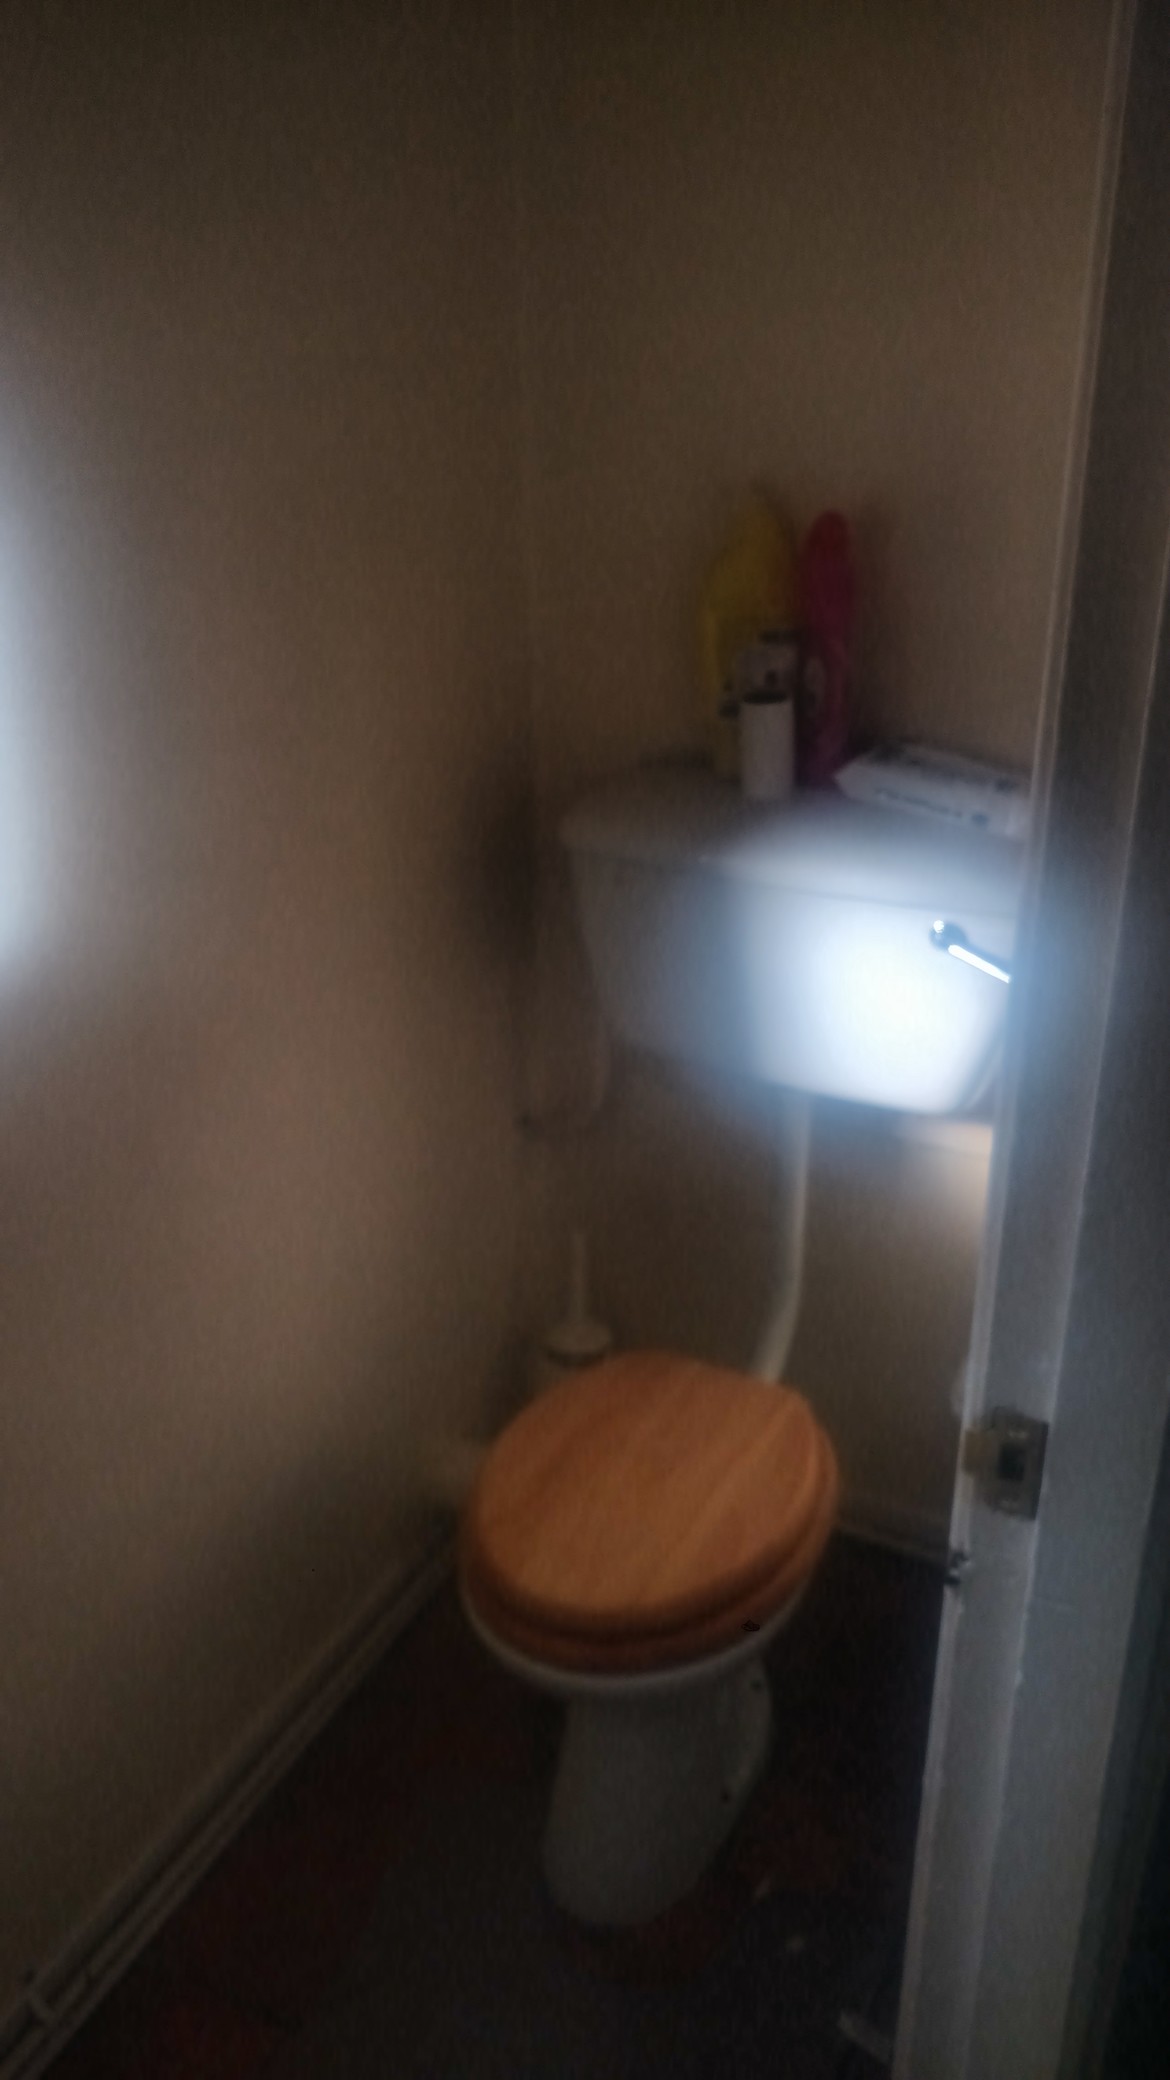 The stand-alone toilet closet